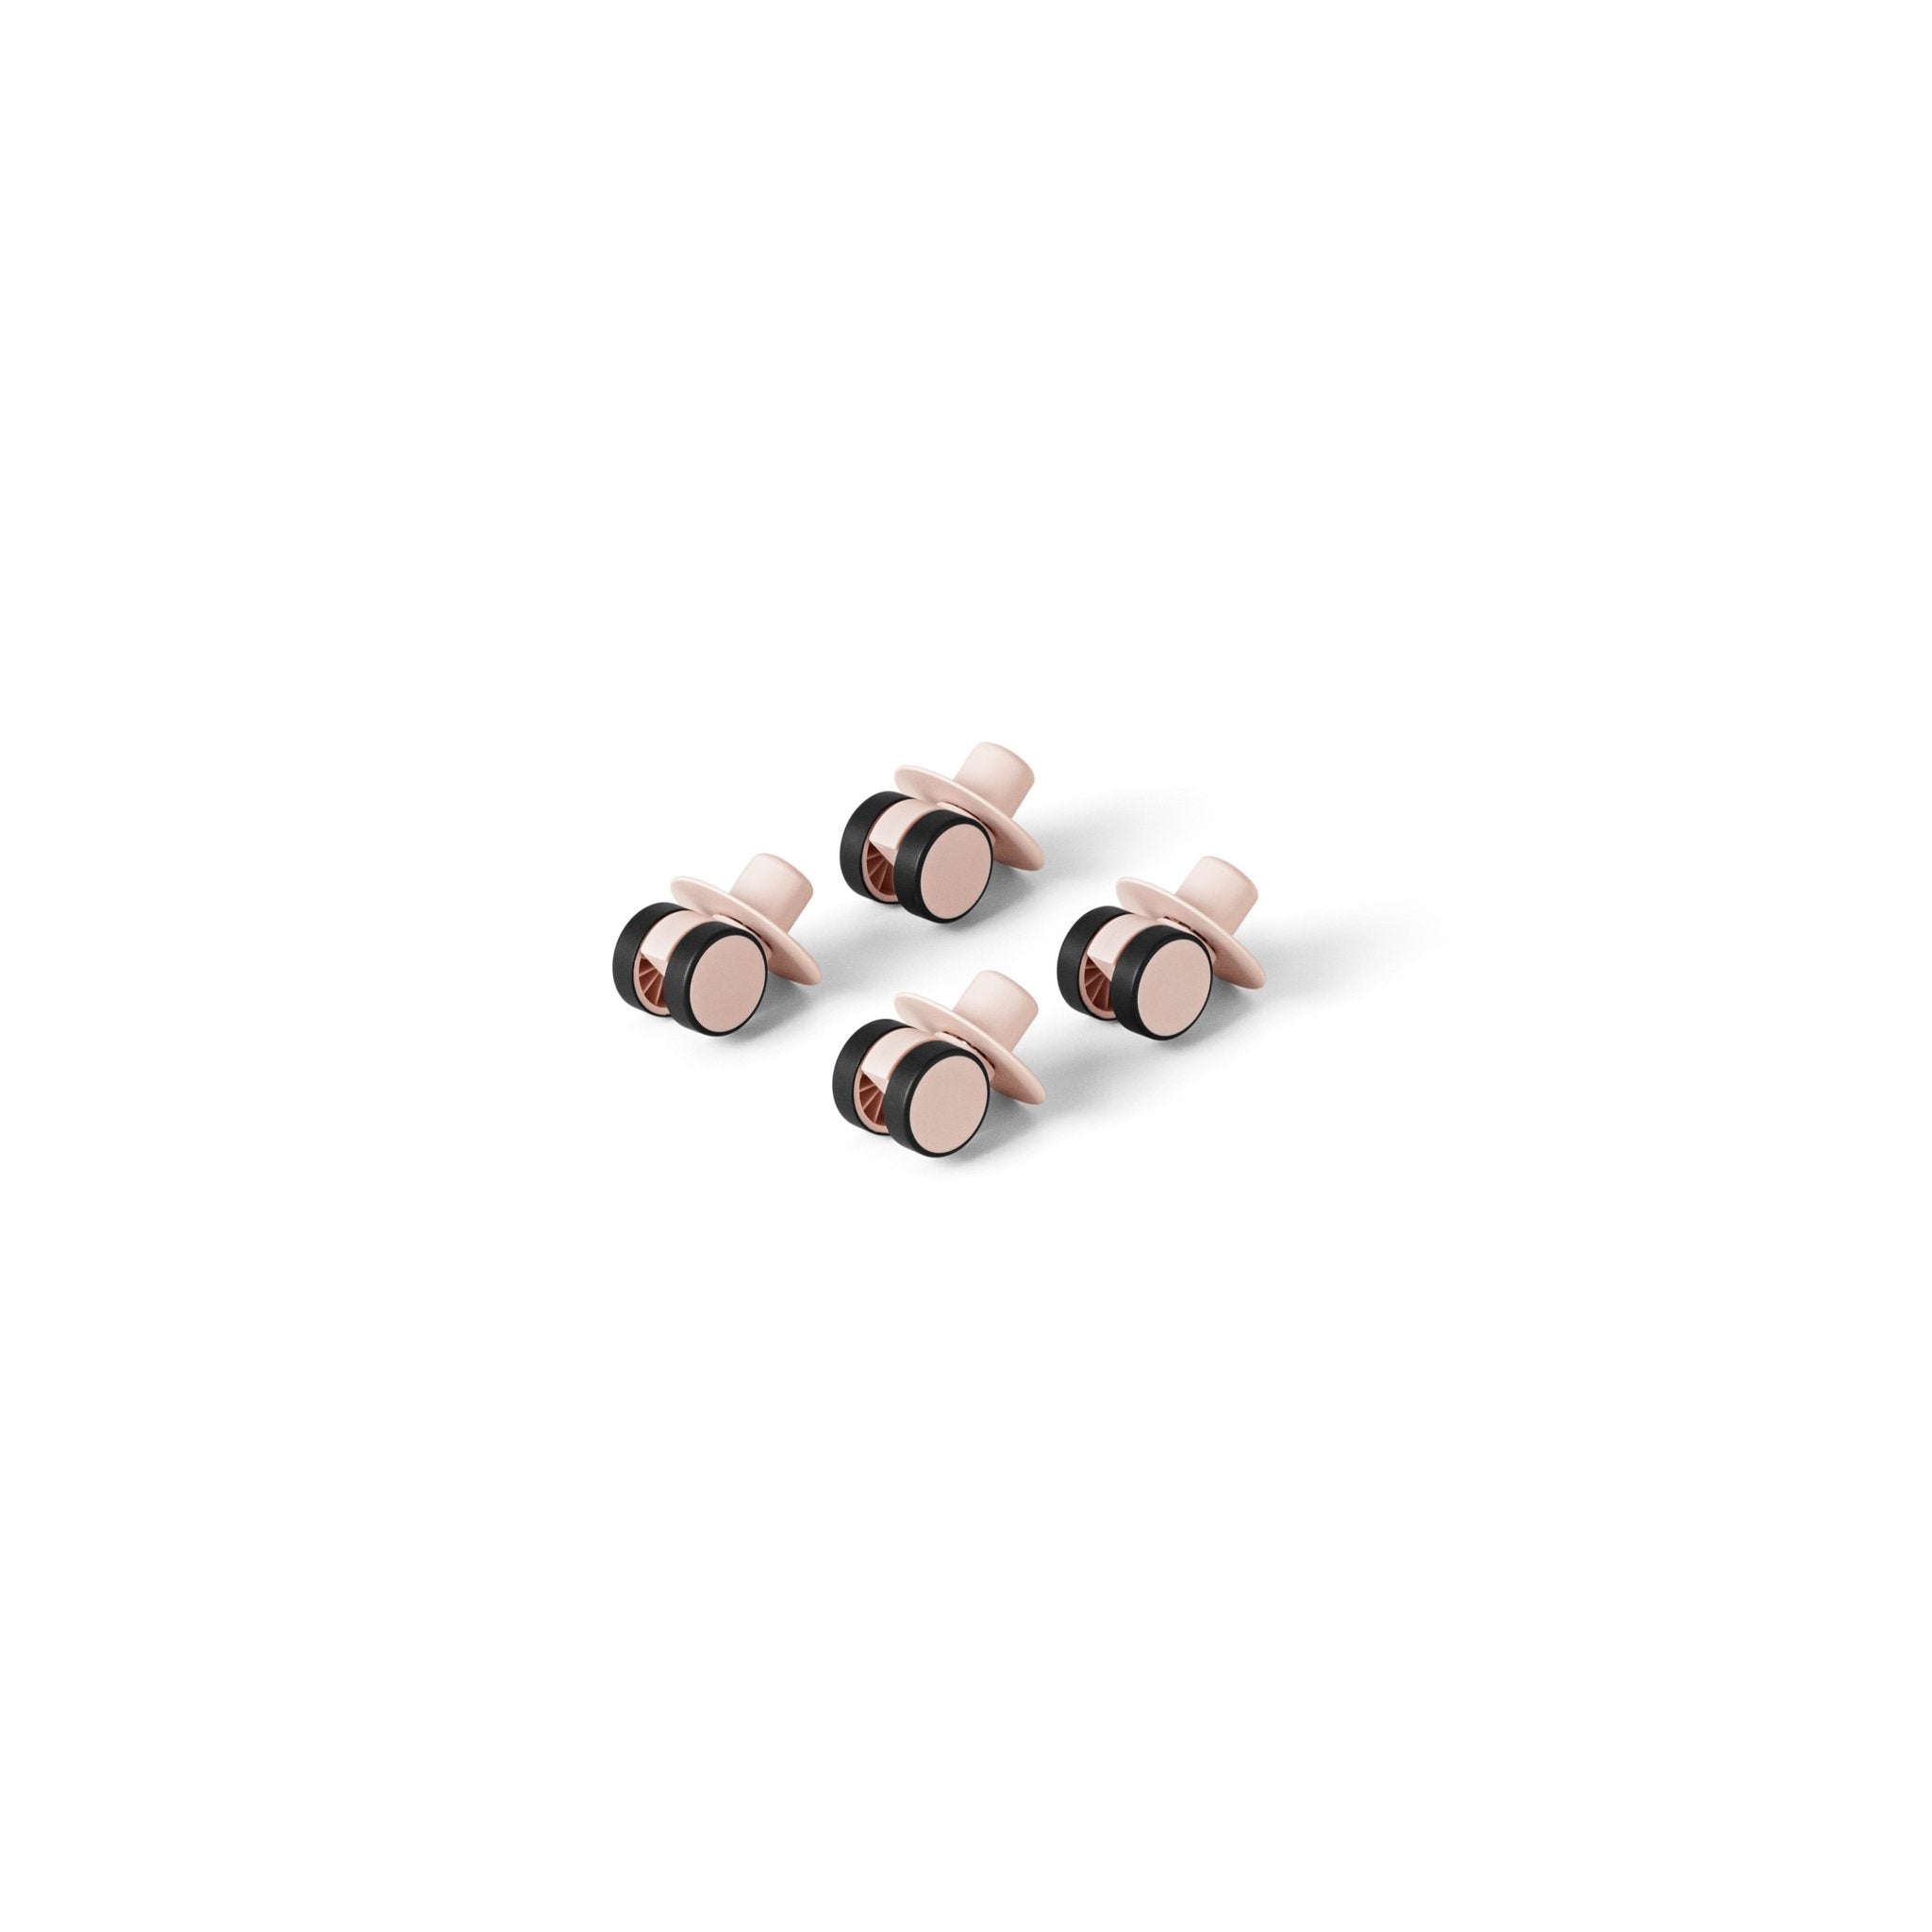 Module - four rotary wheels, pink/soft rose